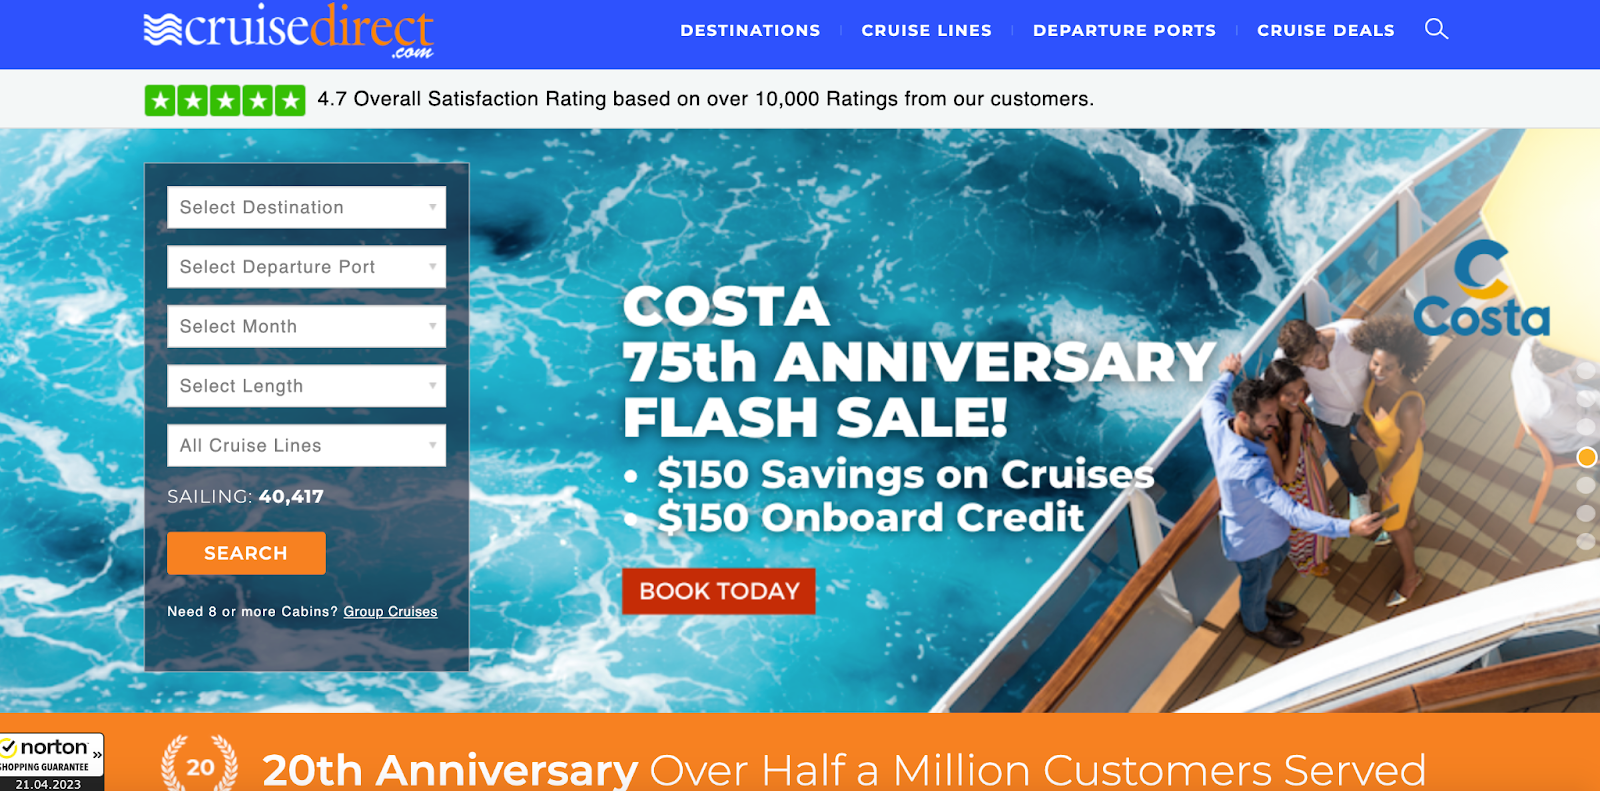 A screenshot of the Cruise Direct homepage